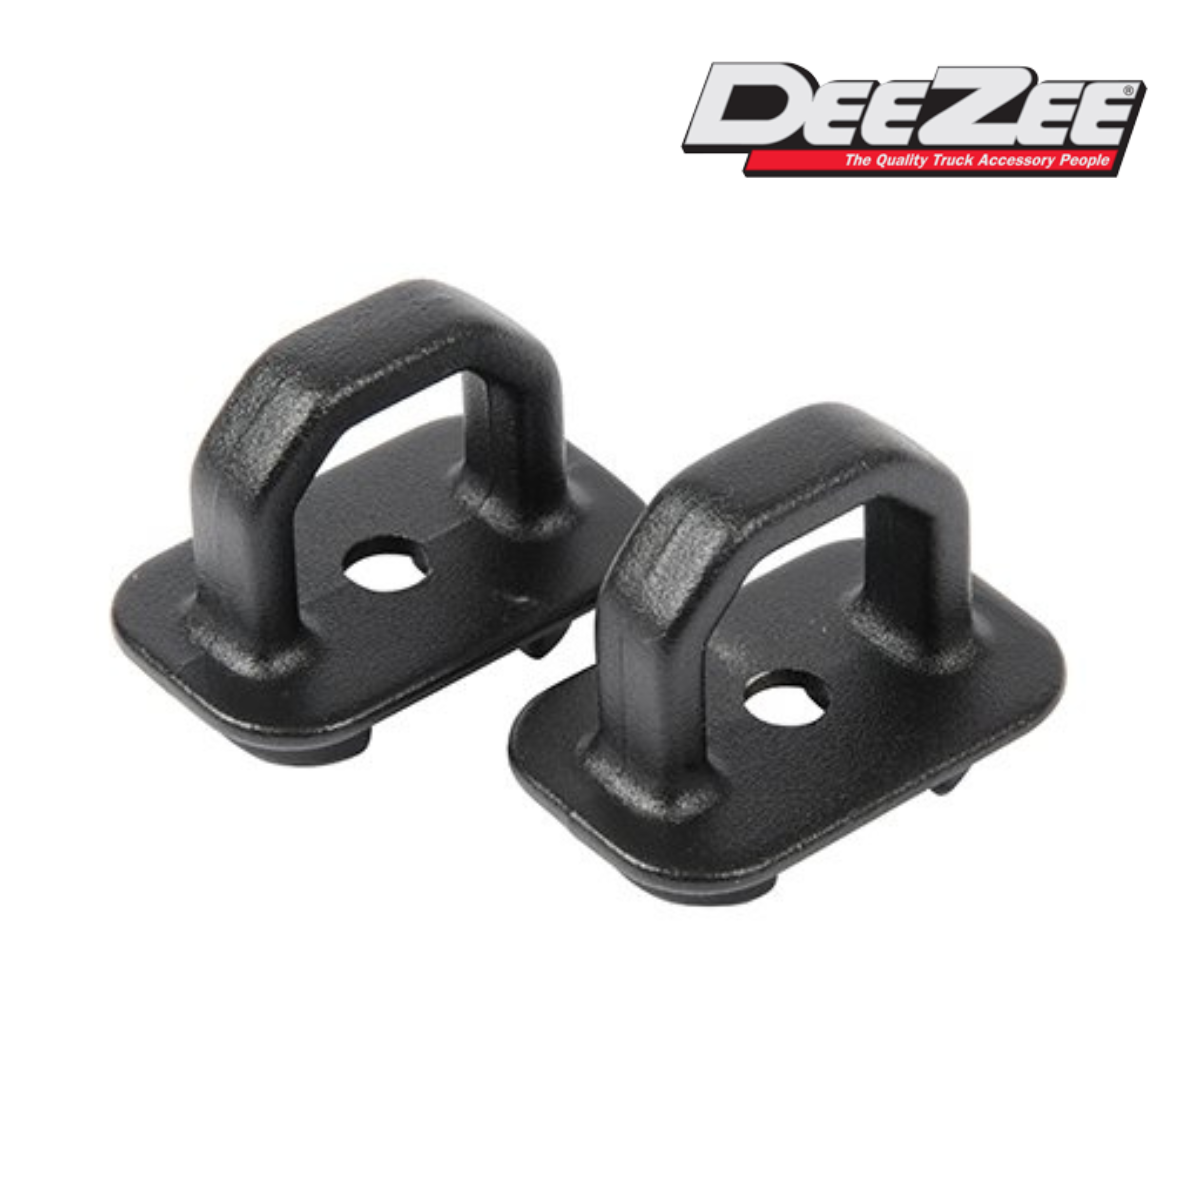 Secure your cargo with Dee Zee’s Truck Bed Tie Downs. Dee Zee’s Truck Bed Tie Downs create easy and solid anchor points to secure your cargo properly. The tie downs don’t need drilling as they fit into existing truck bed locations for Gm, Ram and Ford trucks, with all mounting hardware included for an easy install. Dee Zee Tie Downs are sold in pairs, made of cast aluminum with a black powder coated finish in the USA and rated for the maximum strength of your truck bed. Visit us to keep your cargo secure with Dee Zee’s Truck Bed Tie Downs.